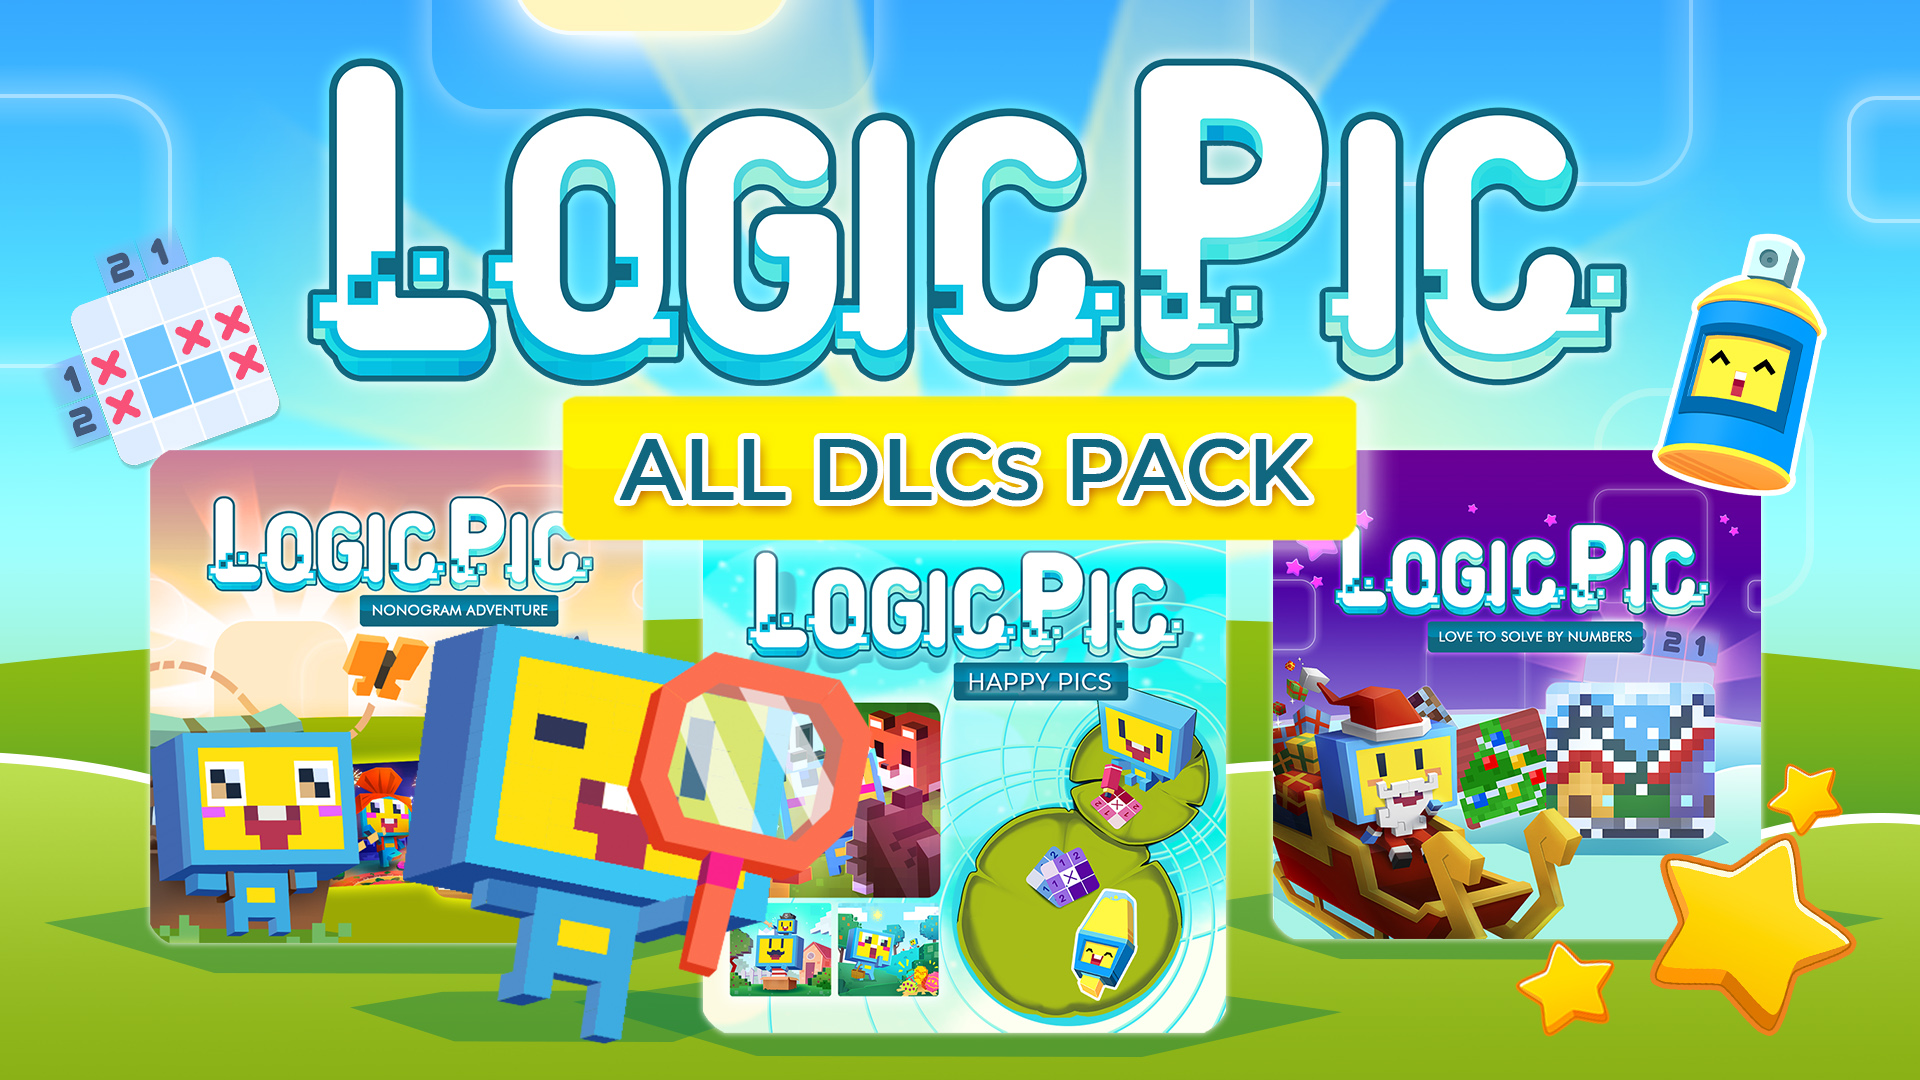 naptime.games Logic Pic All DLCs Pack_banner_1920x1080